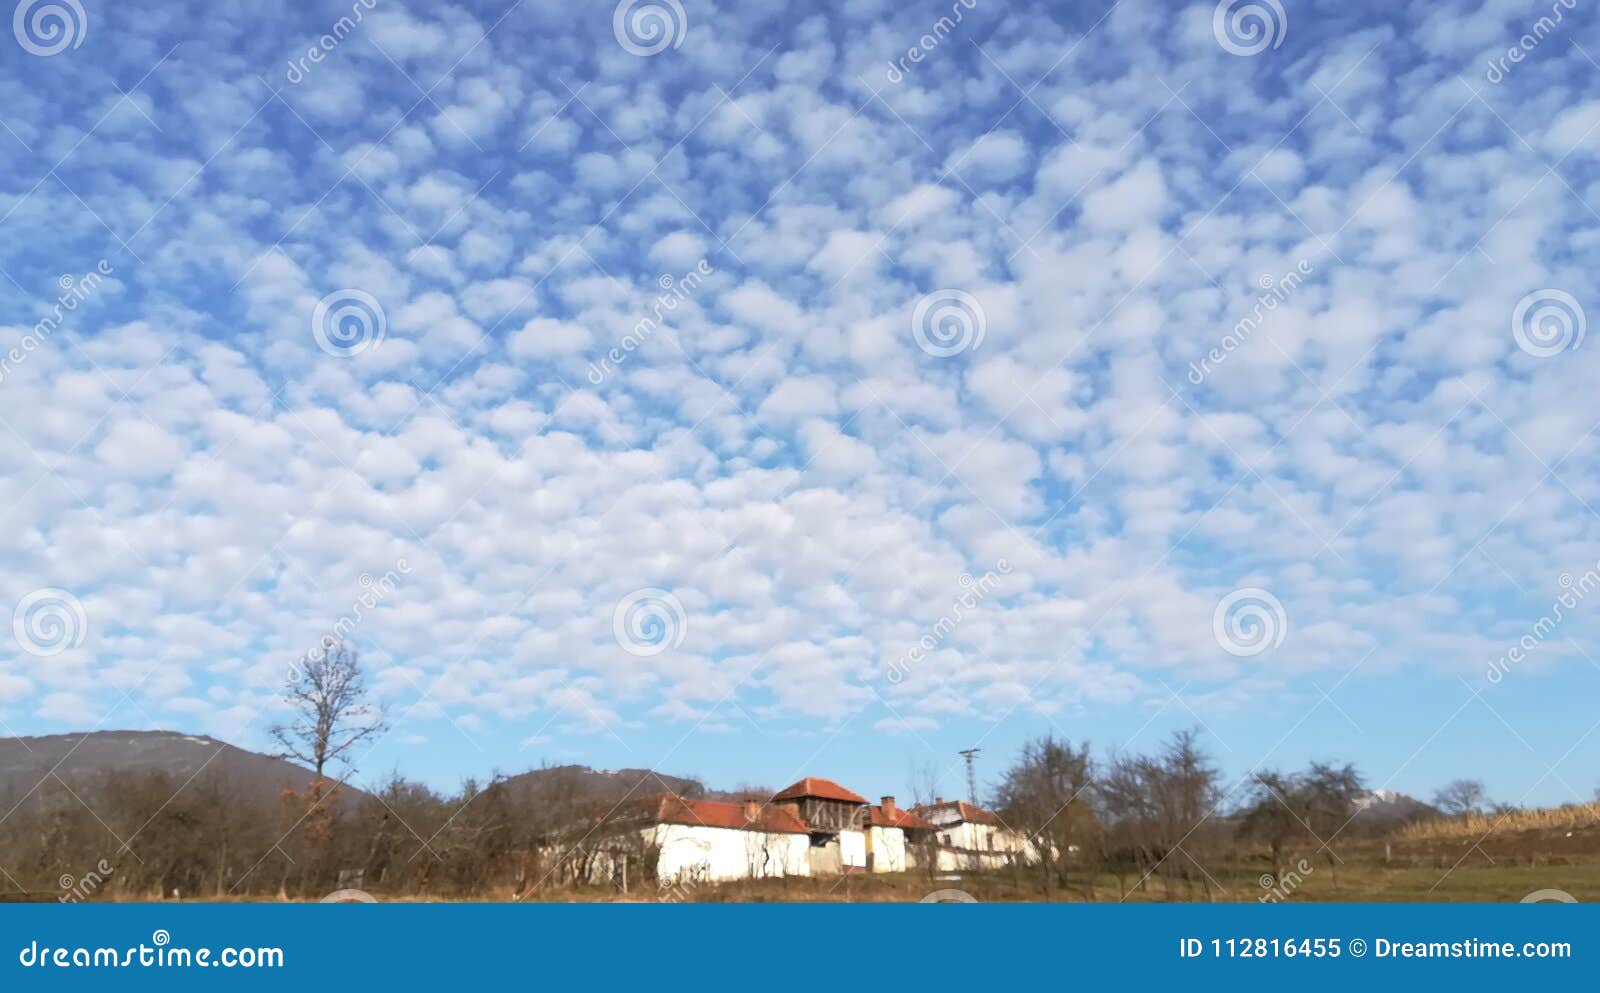 Foam In The Sky Of Clouds Stock Image Image Of Village 112816455